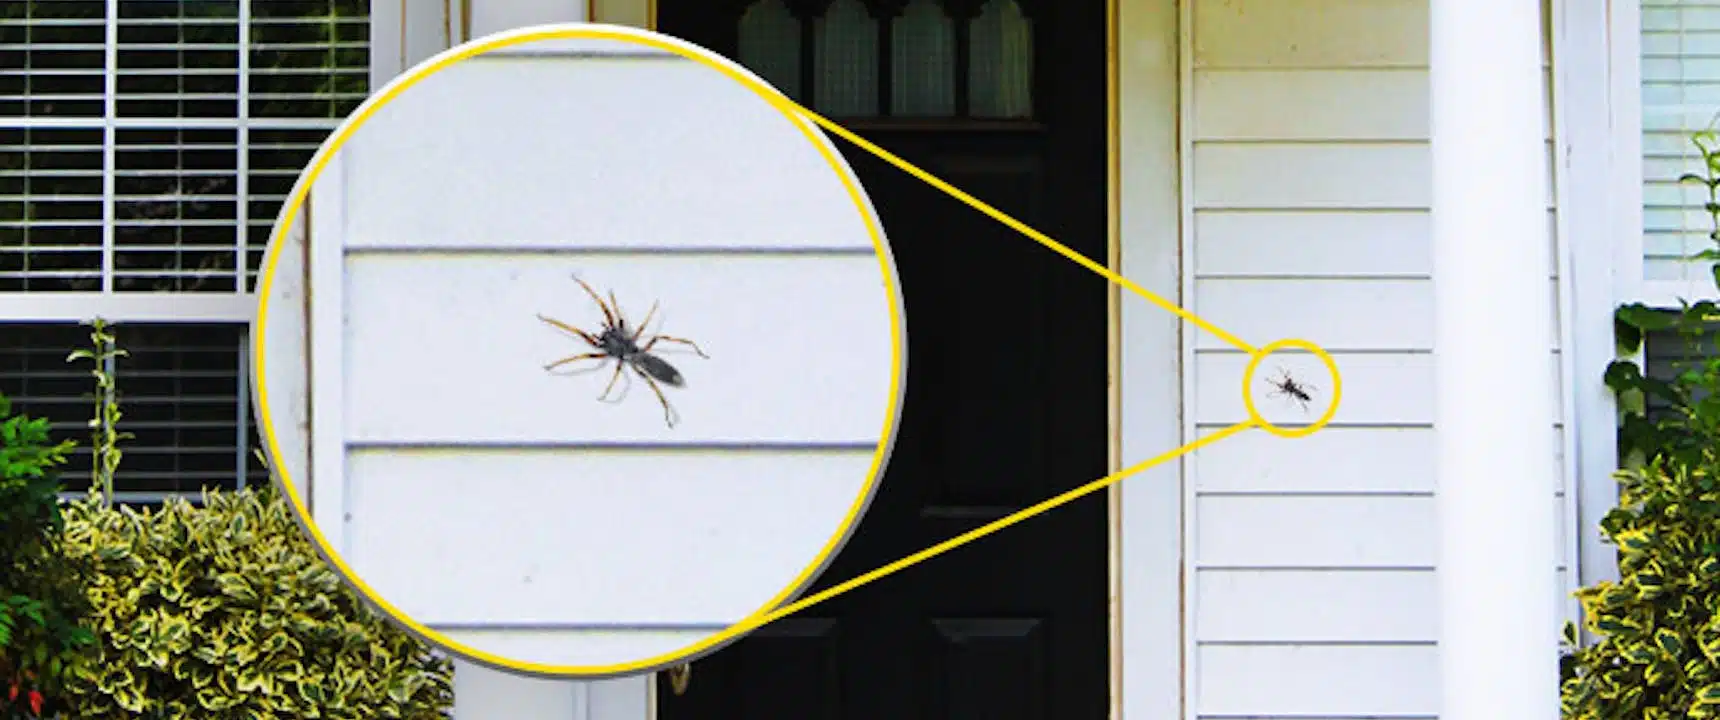 Tips to Keep Creepy Crawlers Out of Your Home This Winter